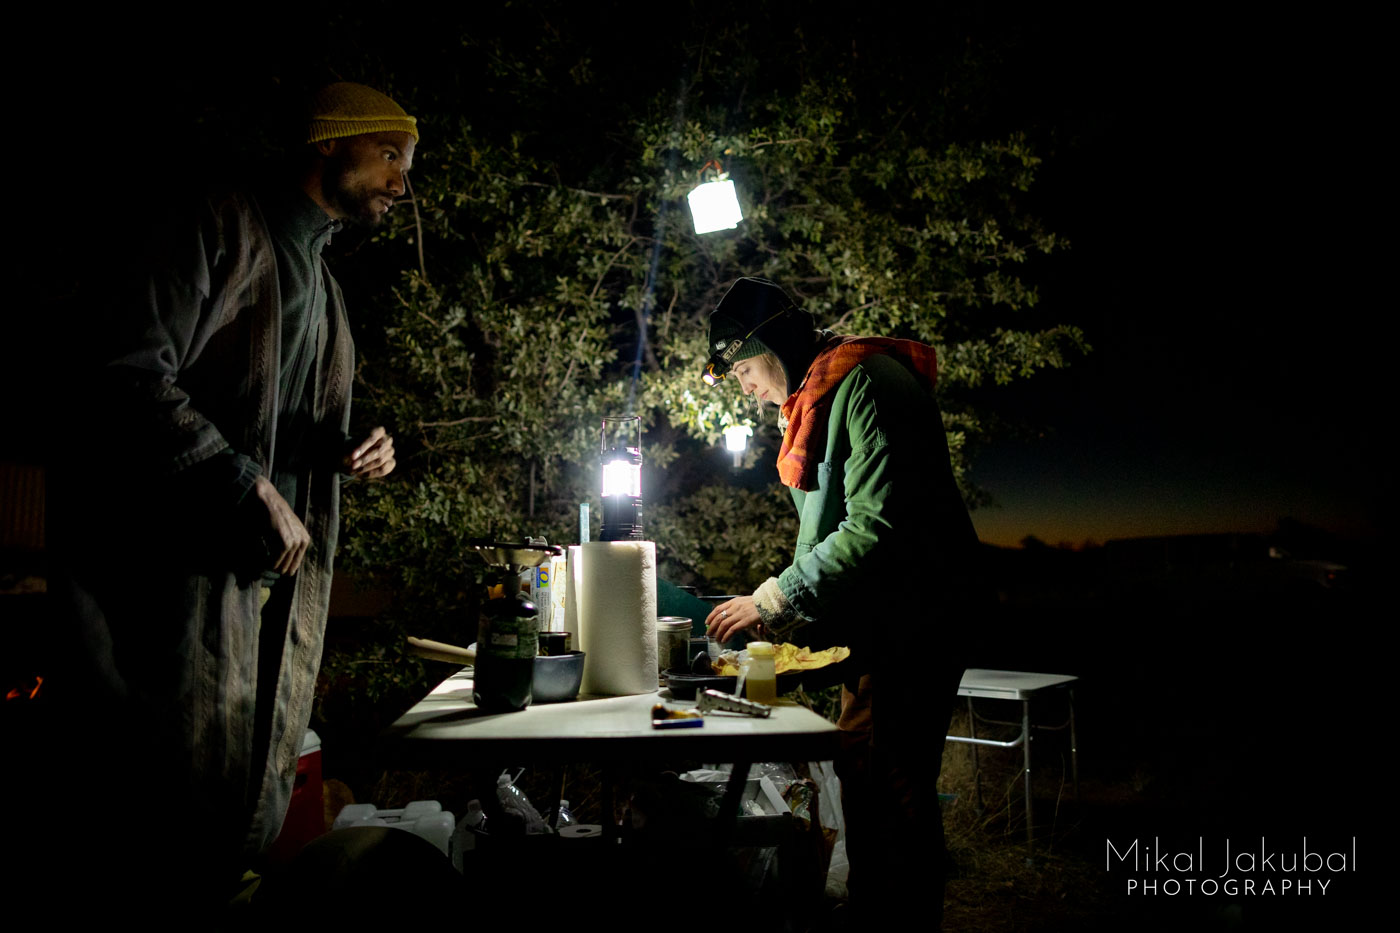 Two people, a man and a woman stand next to a small table in front of a tree at night. The table is illuminated with several small battery powered LED lights. The woman is preparing food on a small portable cook stove.